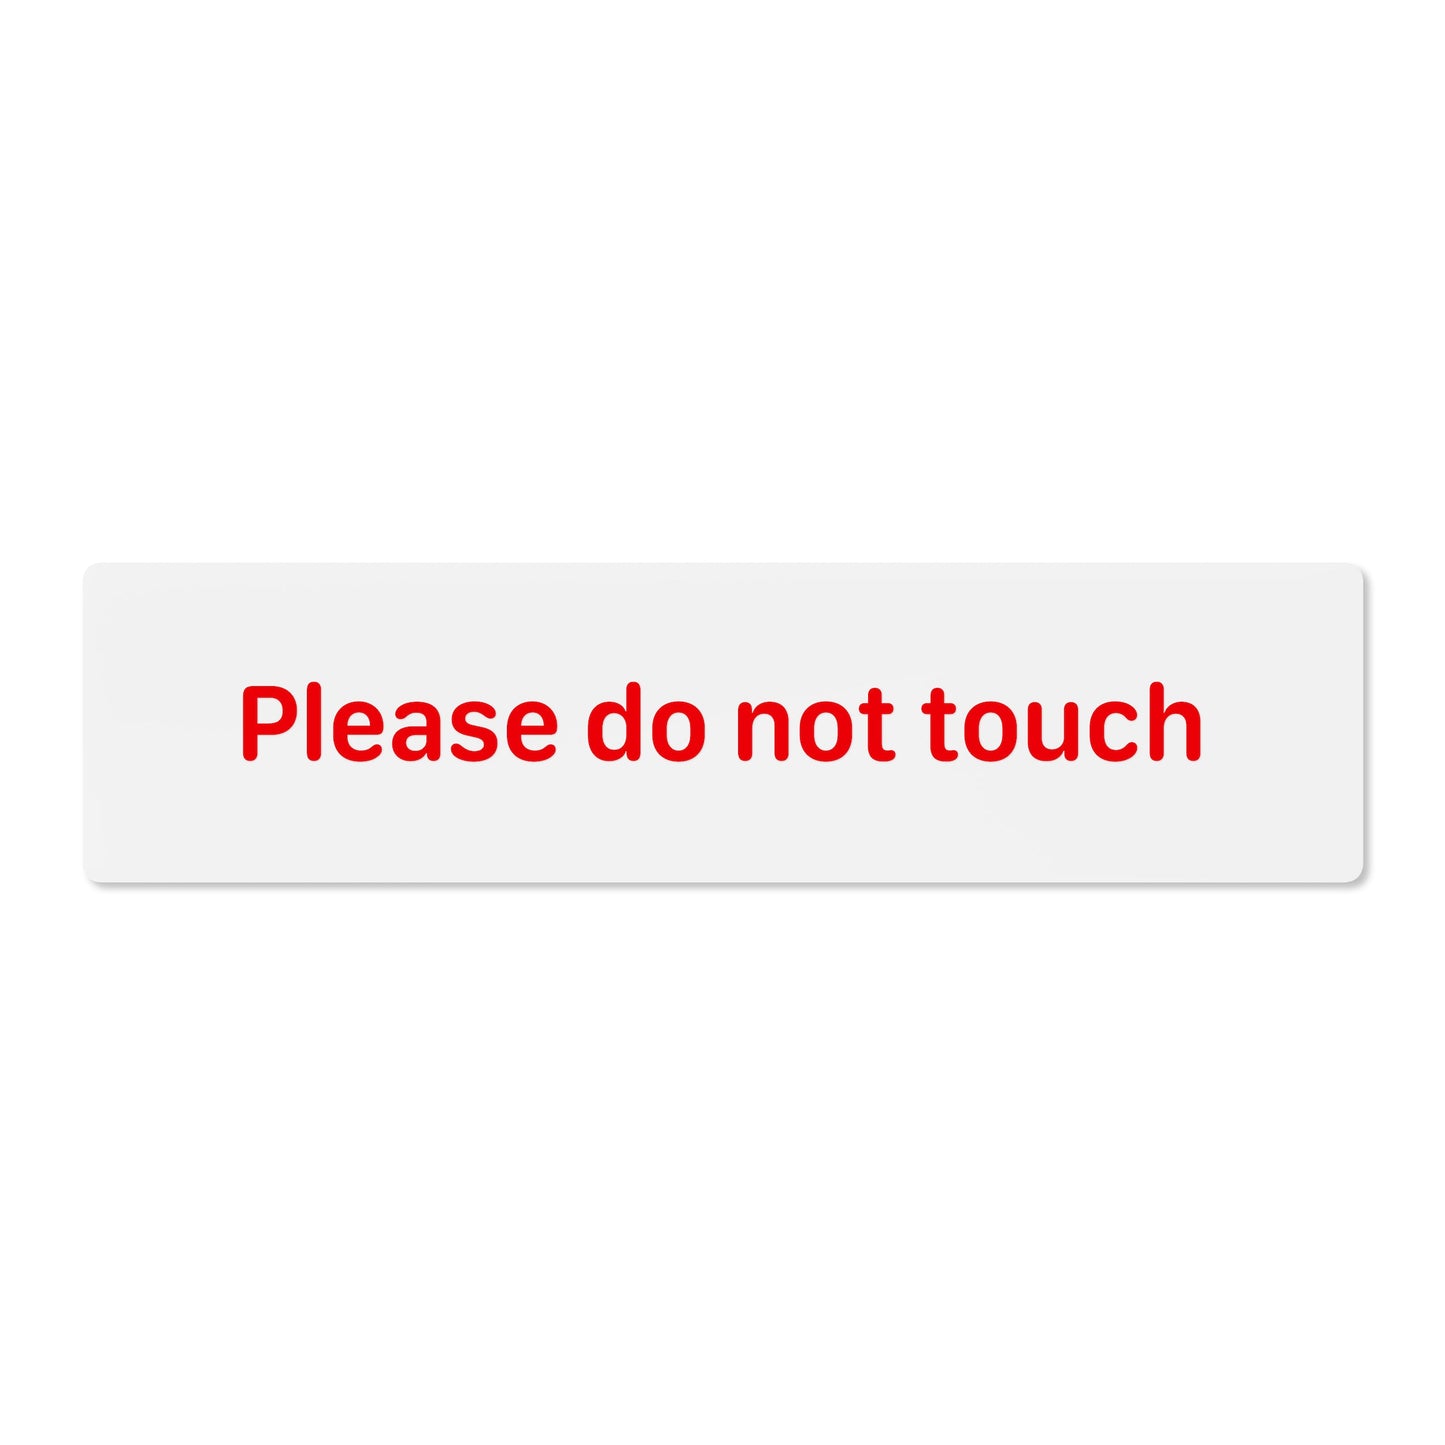 Please do not touch